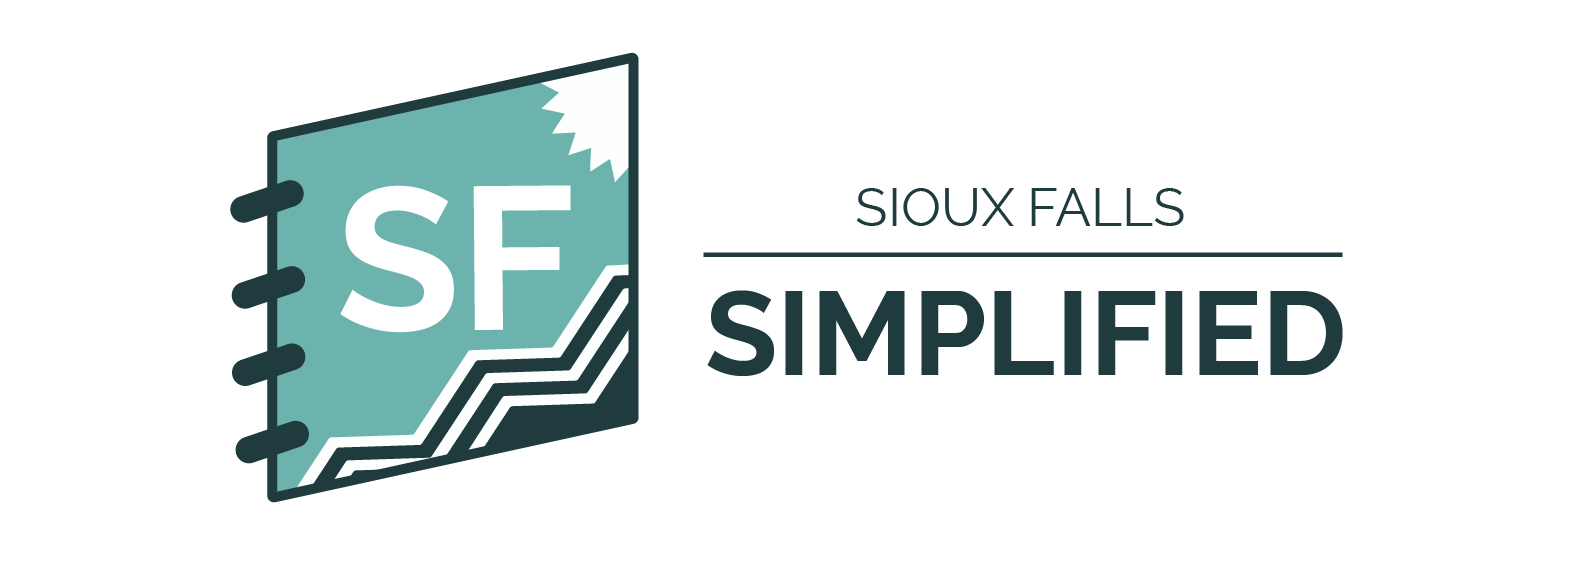 Sioux Falls Simplified